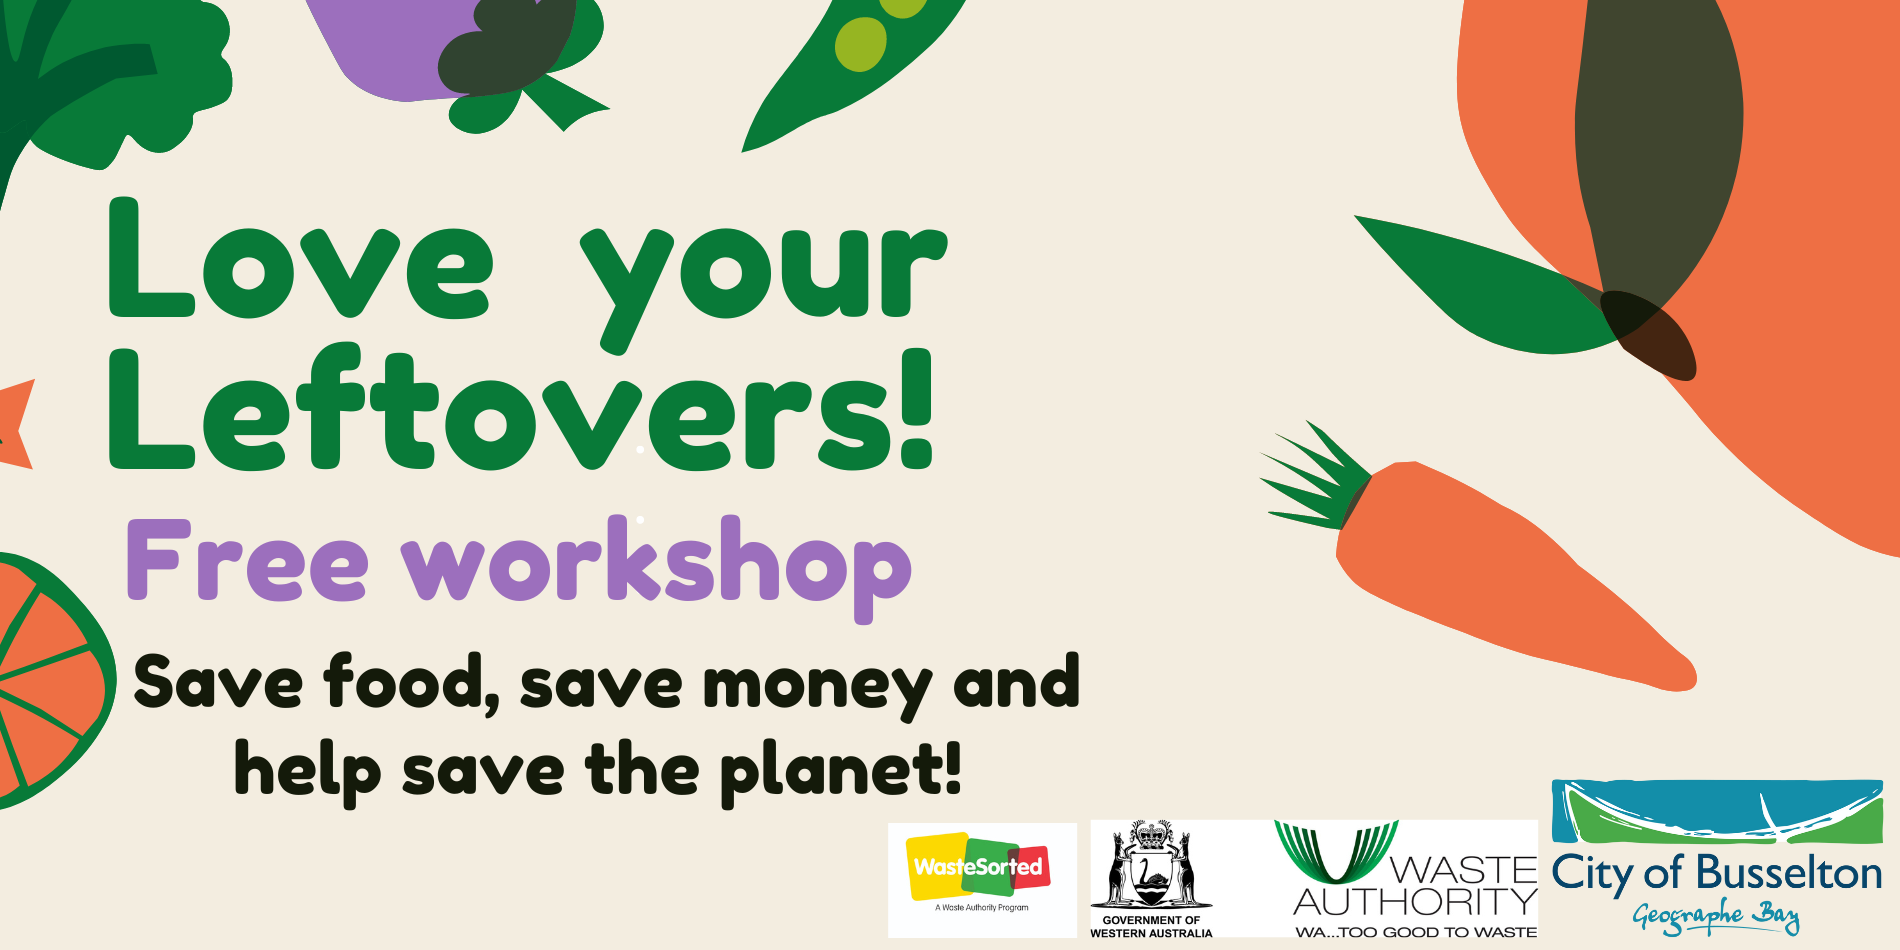 Love your leftovers, hosted by the City of Busselton. Free Workshop on saving food and saving money.